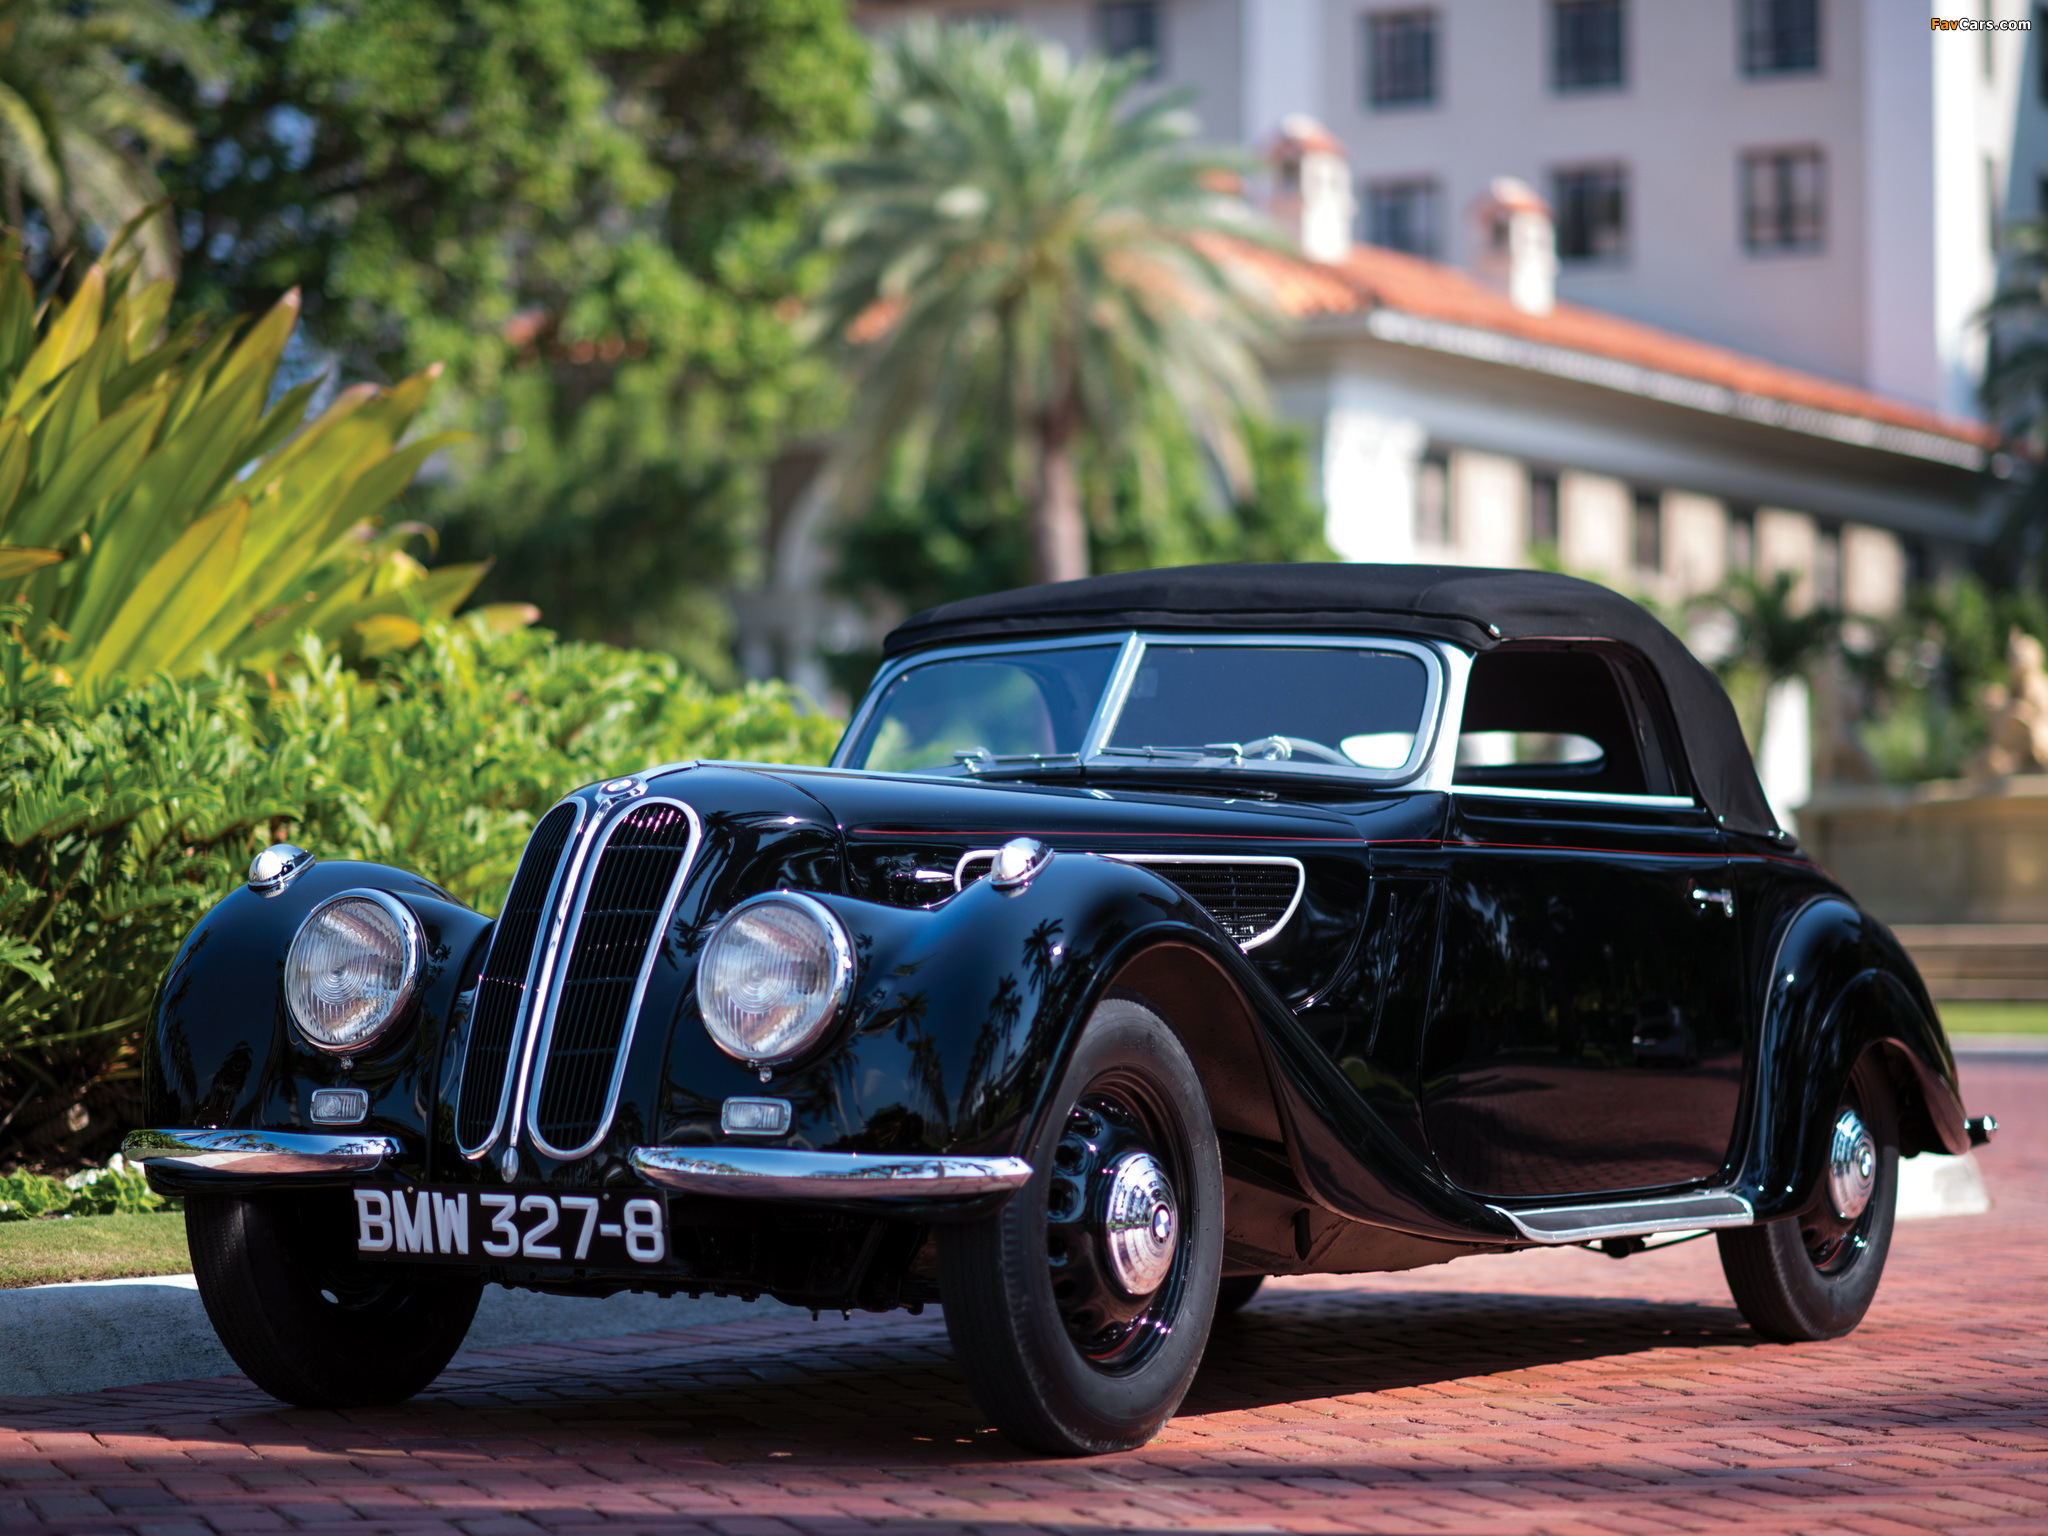 1937 BMW 327 Wallpapers | SuperCars.net